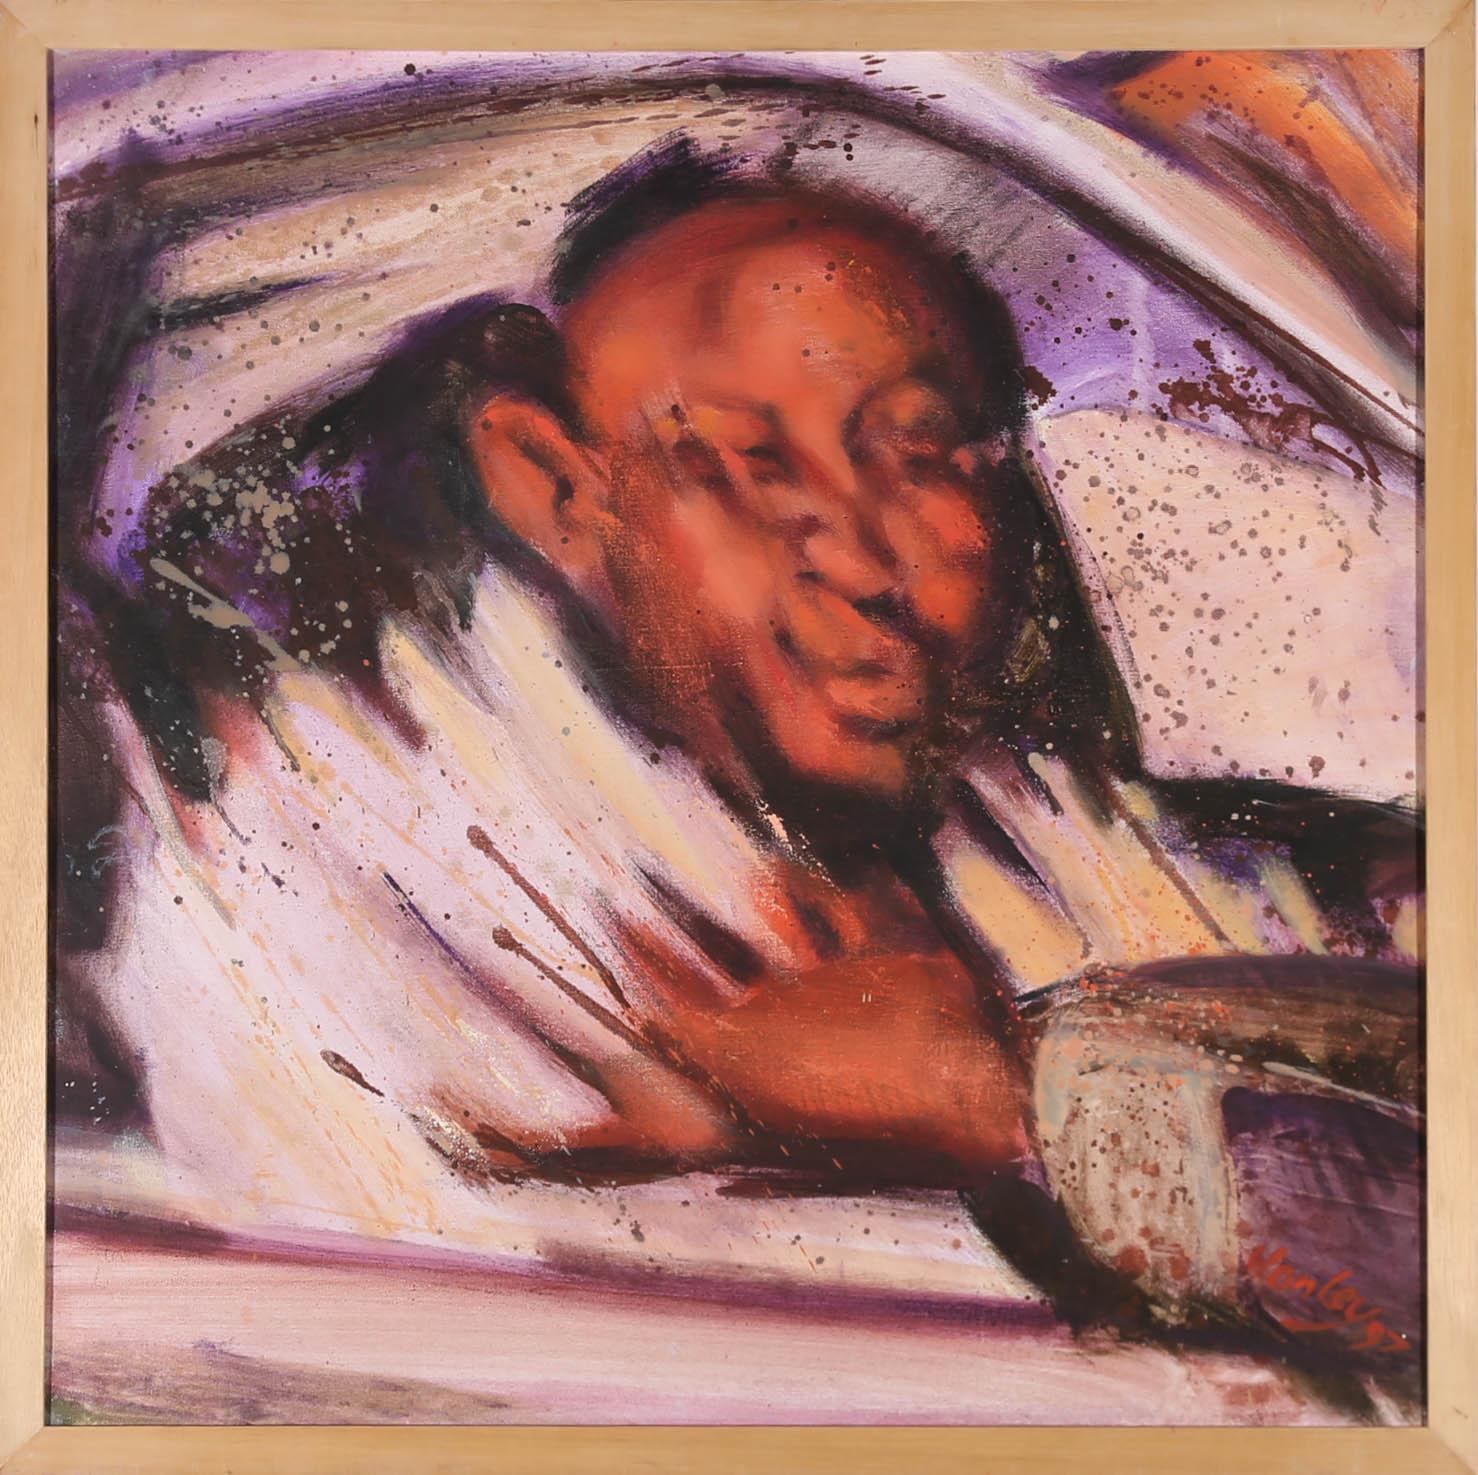 A fun, expressive portrait depicting a man in the driver's seat of a car. the gestural, sweeping brush strokes give the impression that the car is whizzing by the artist, only being able to catch a glimpse of the driver. Signed and dated to the